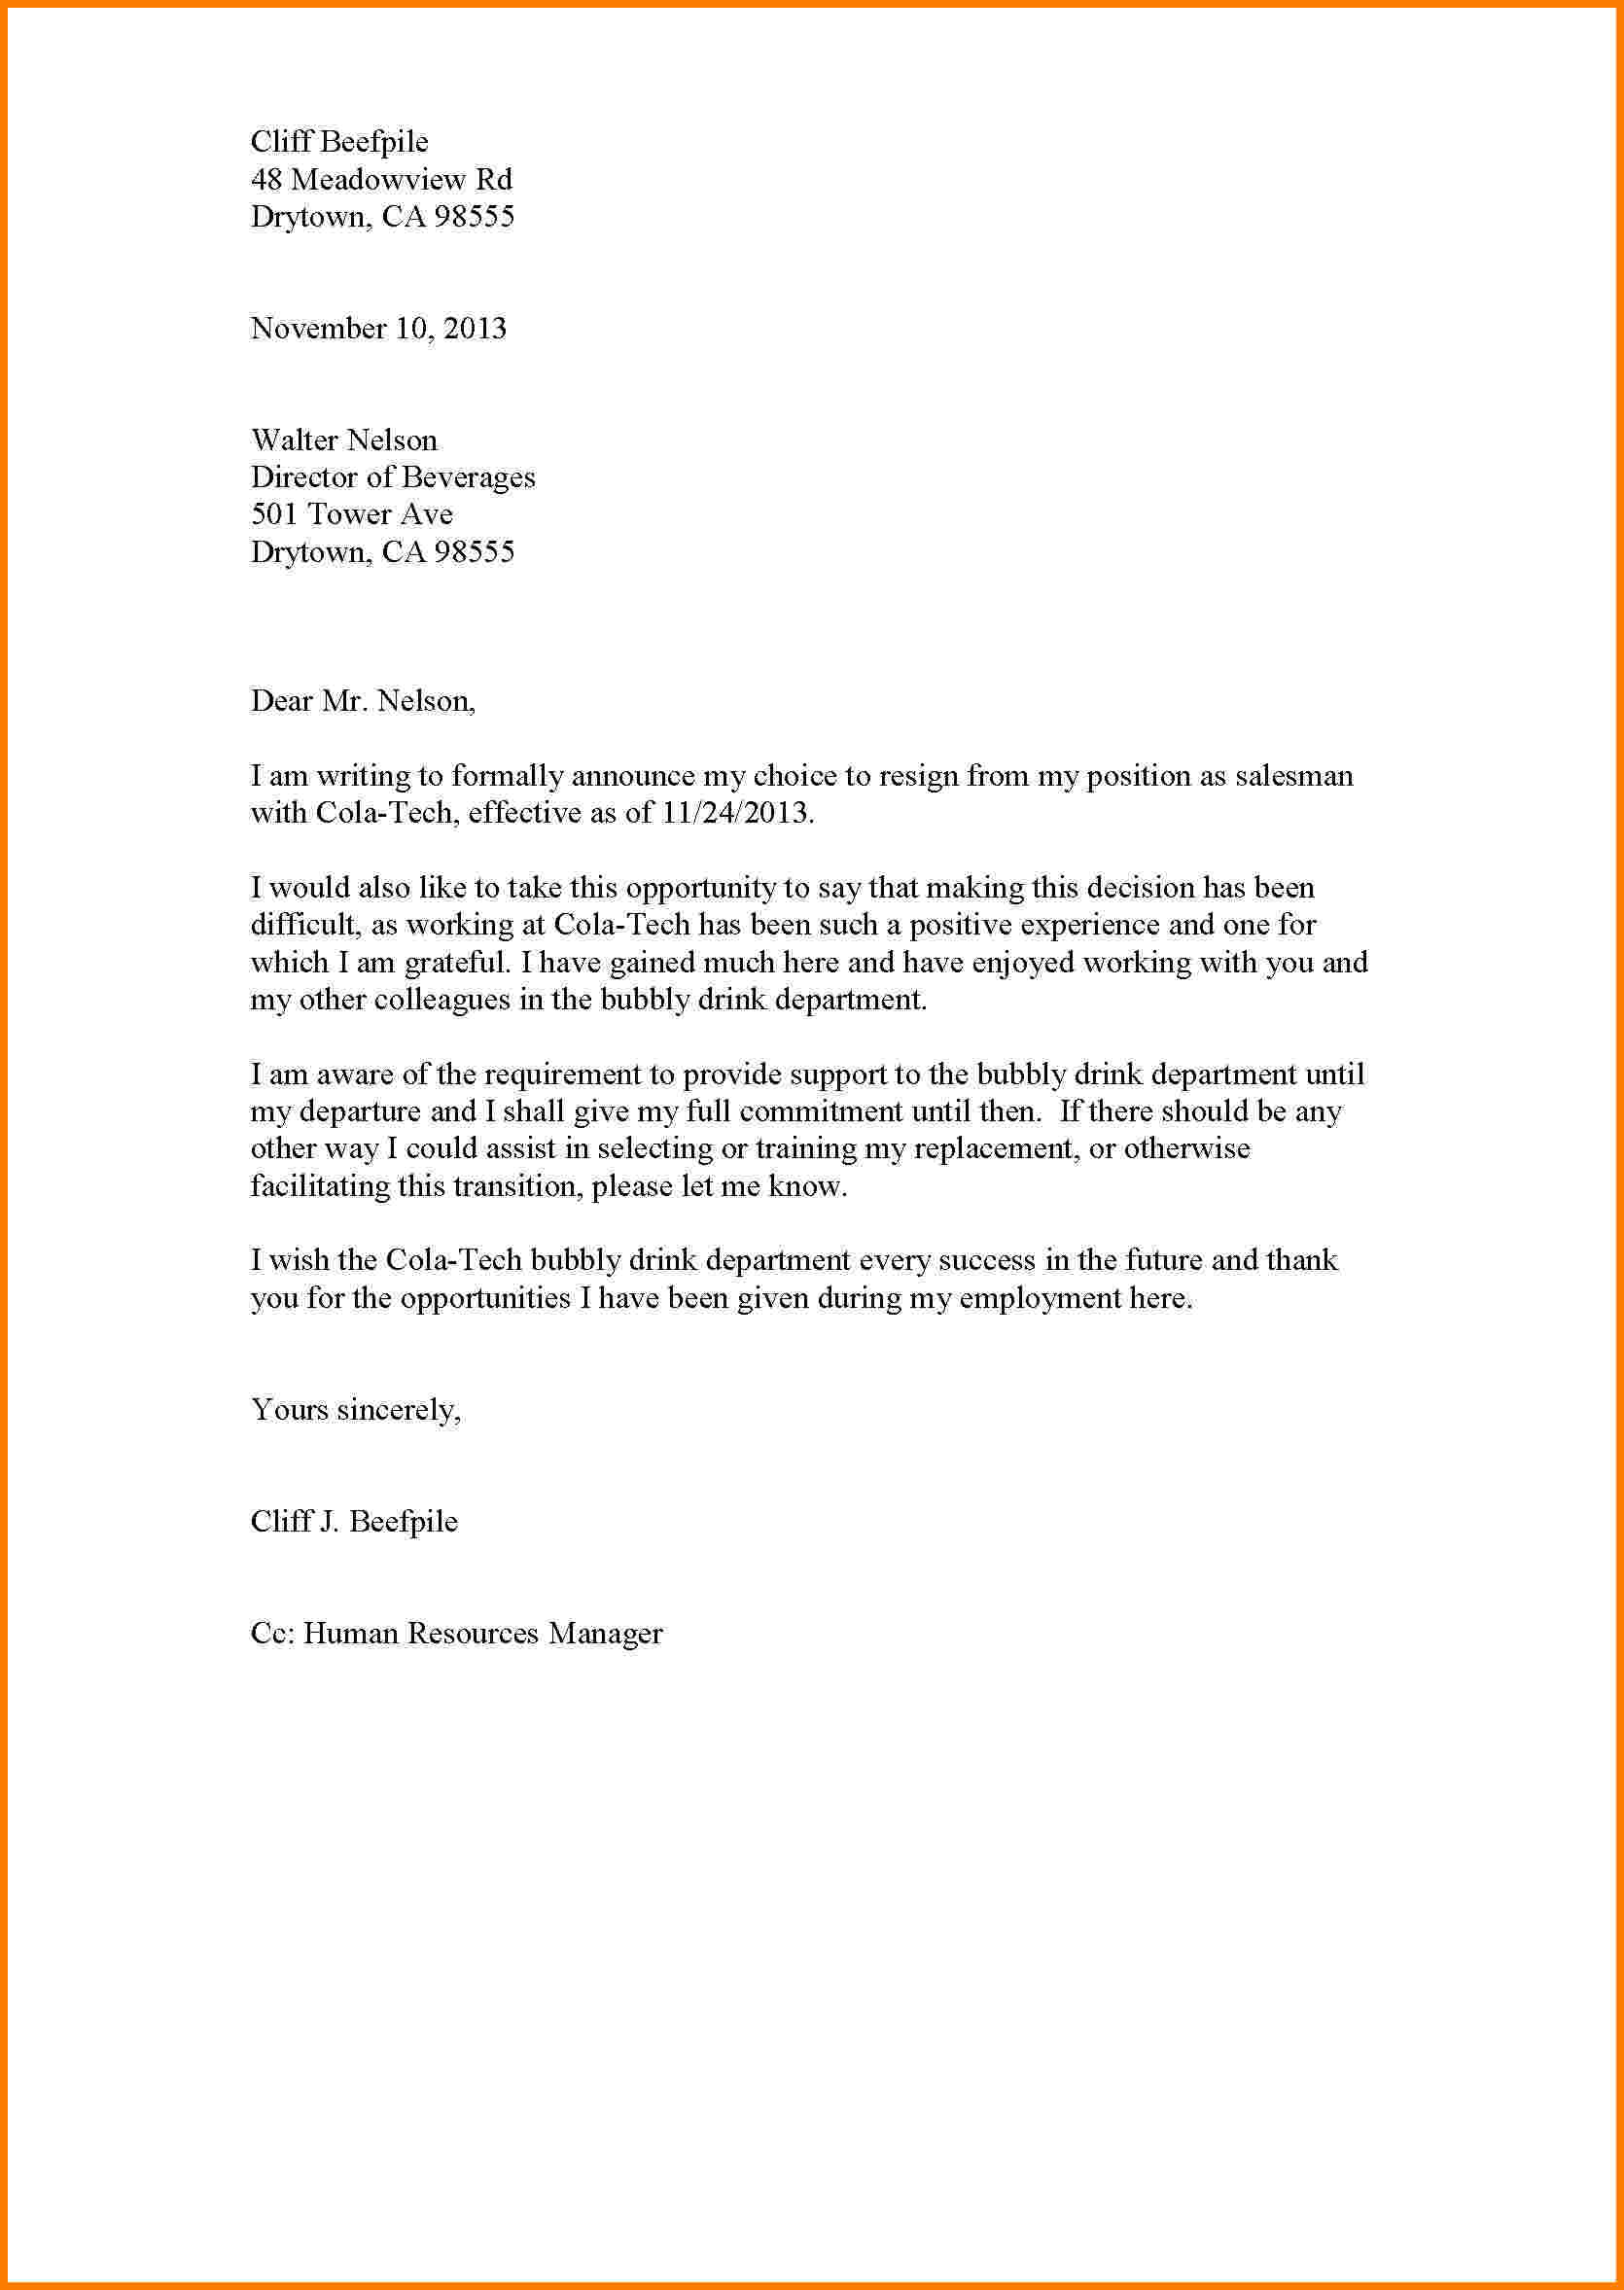 Standard Resignation Letter Template Word - Resignation Letter Template formal Sales Slip Teacher Free Image